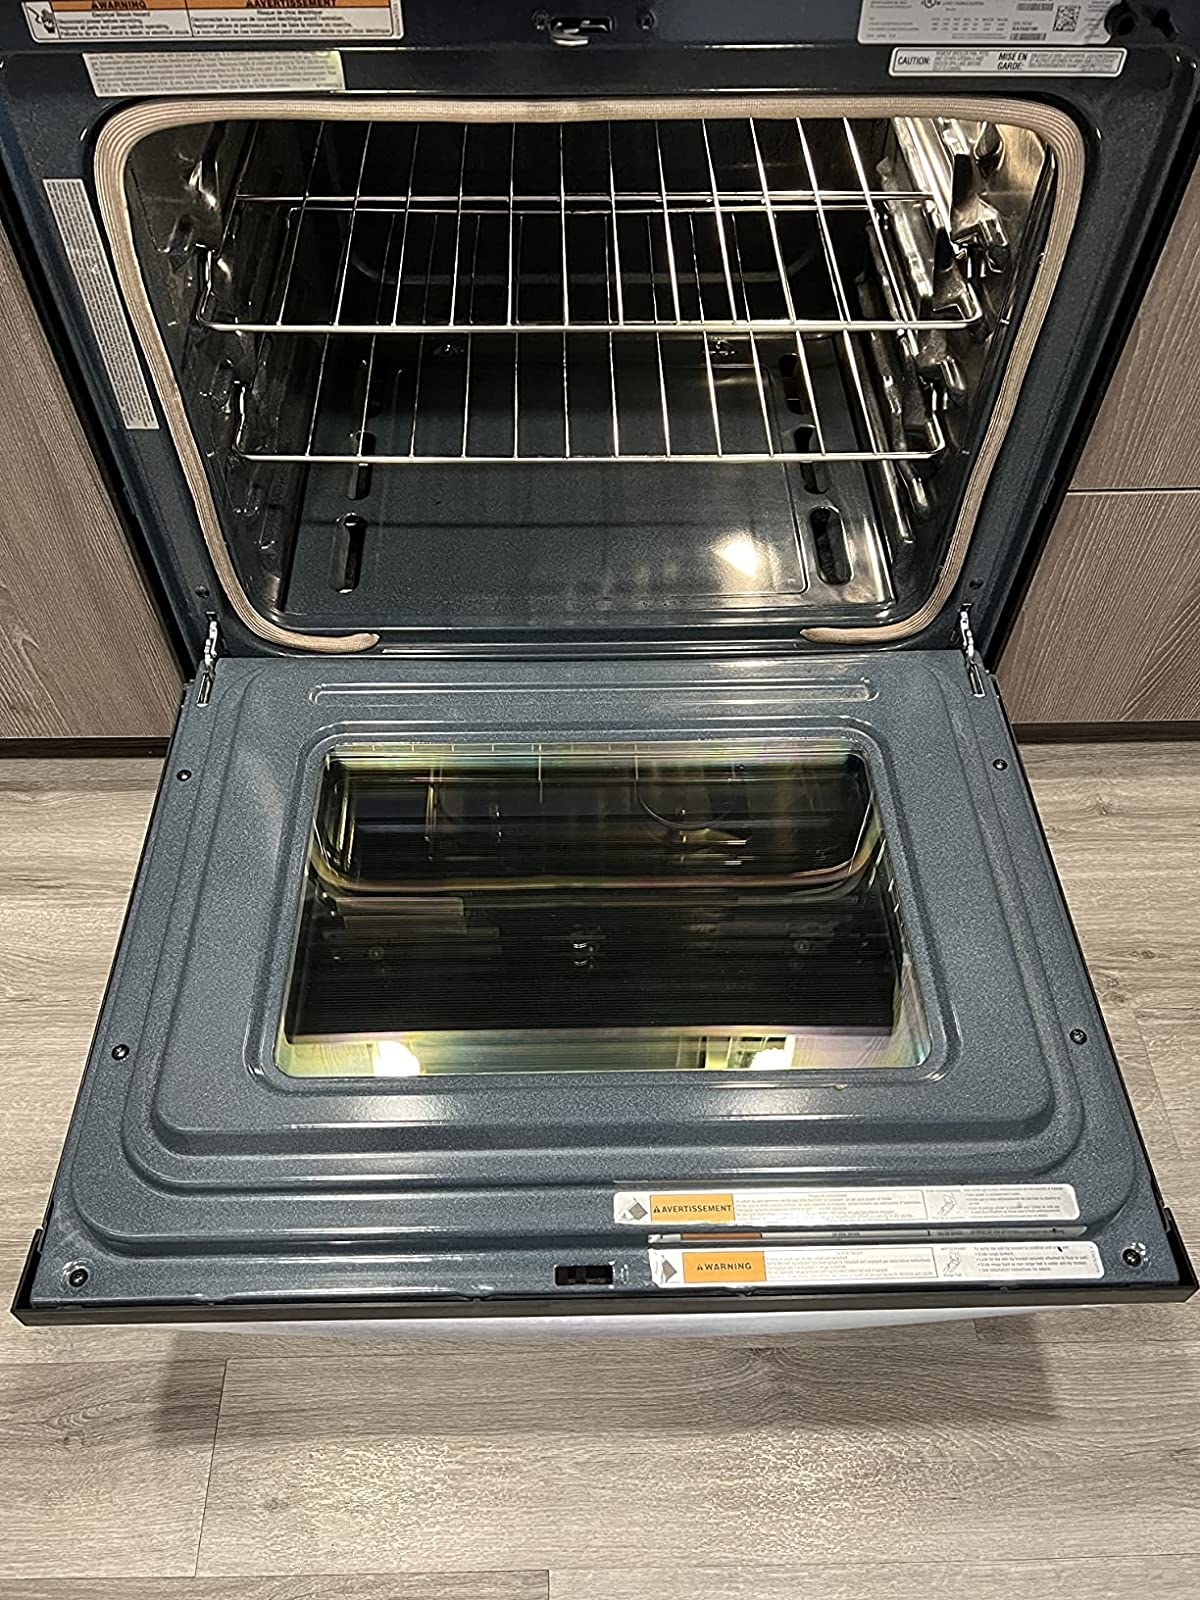 Reviewer image of their clean oven